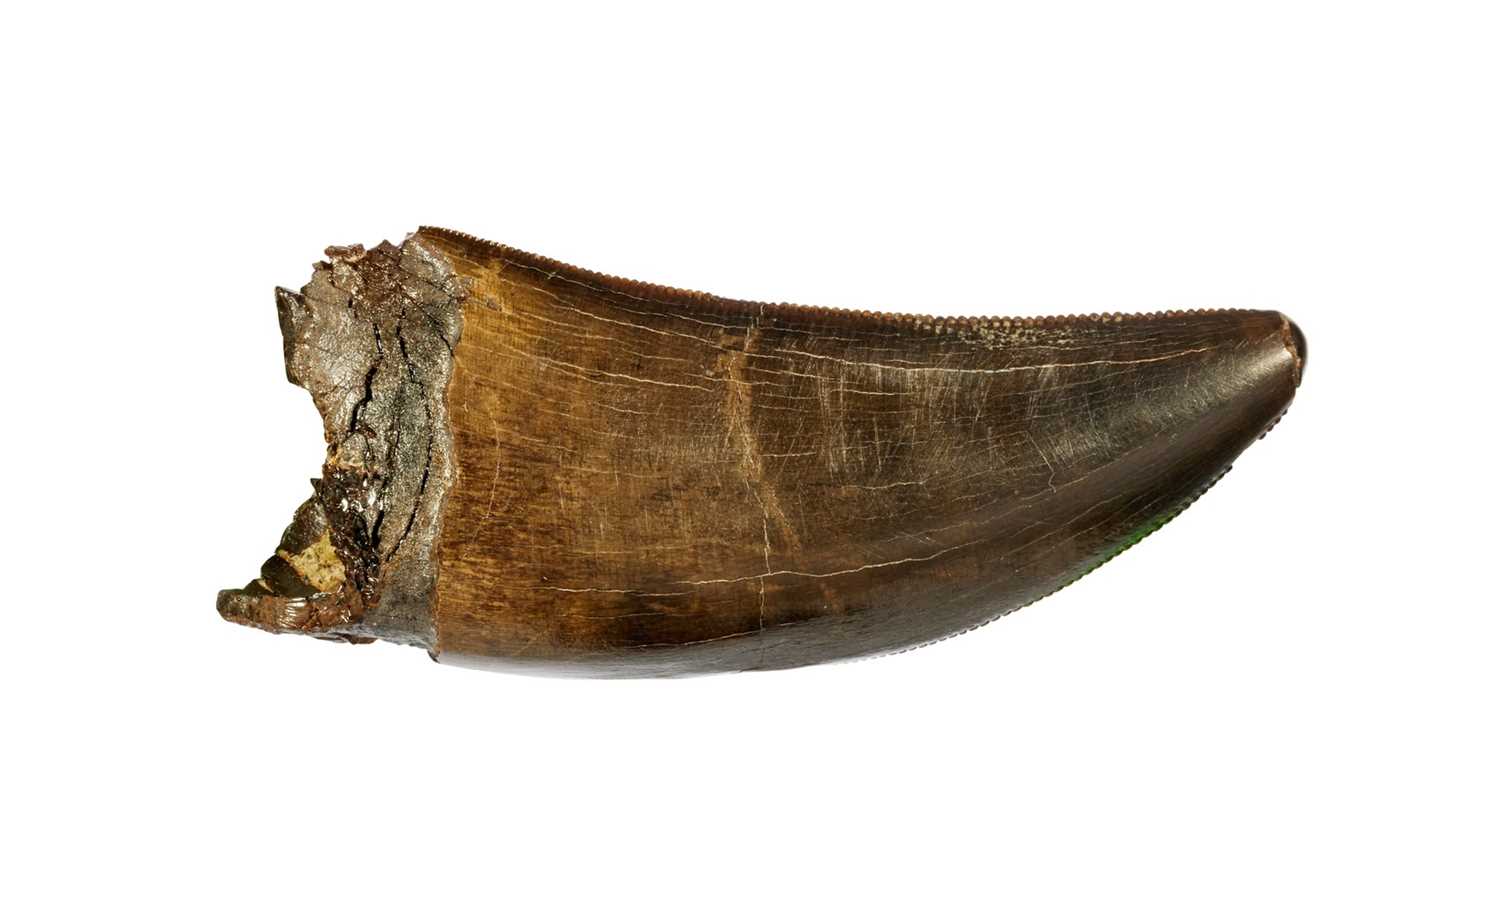 T. REX TOOTH: AN EXCEPTIONAL AND RARE ‘TYRANNOSAURUS REX’ DINOSAUR TOOTH FOSSIL SPECIMEN